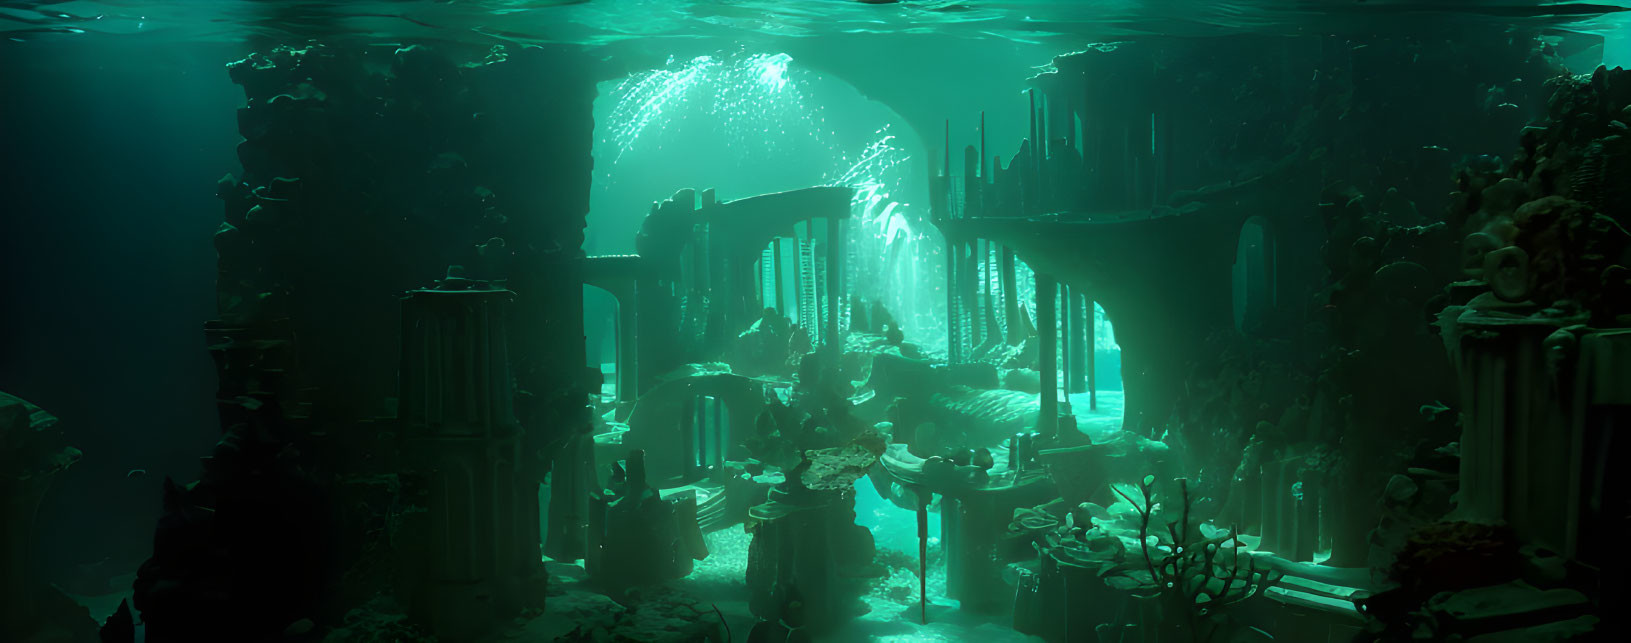 Ancient underwater ruins with greenish illuminated columns and arches